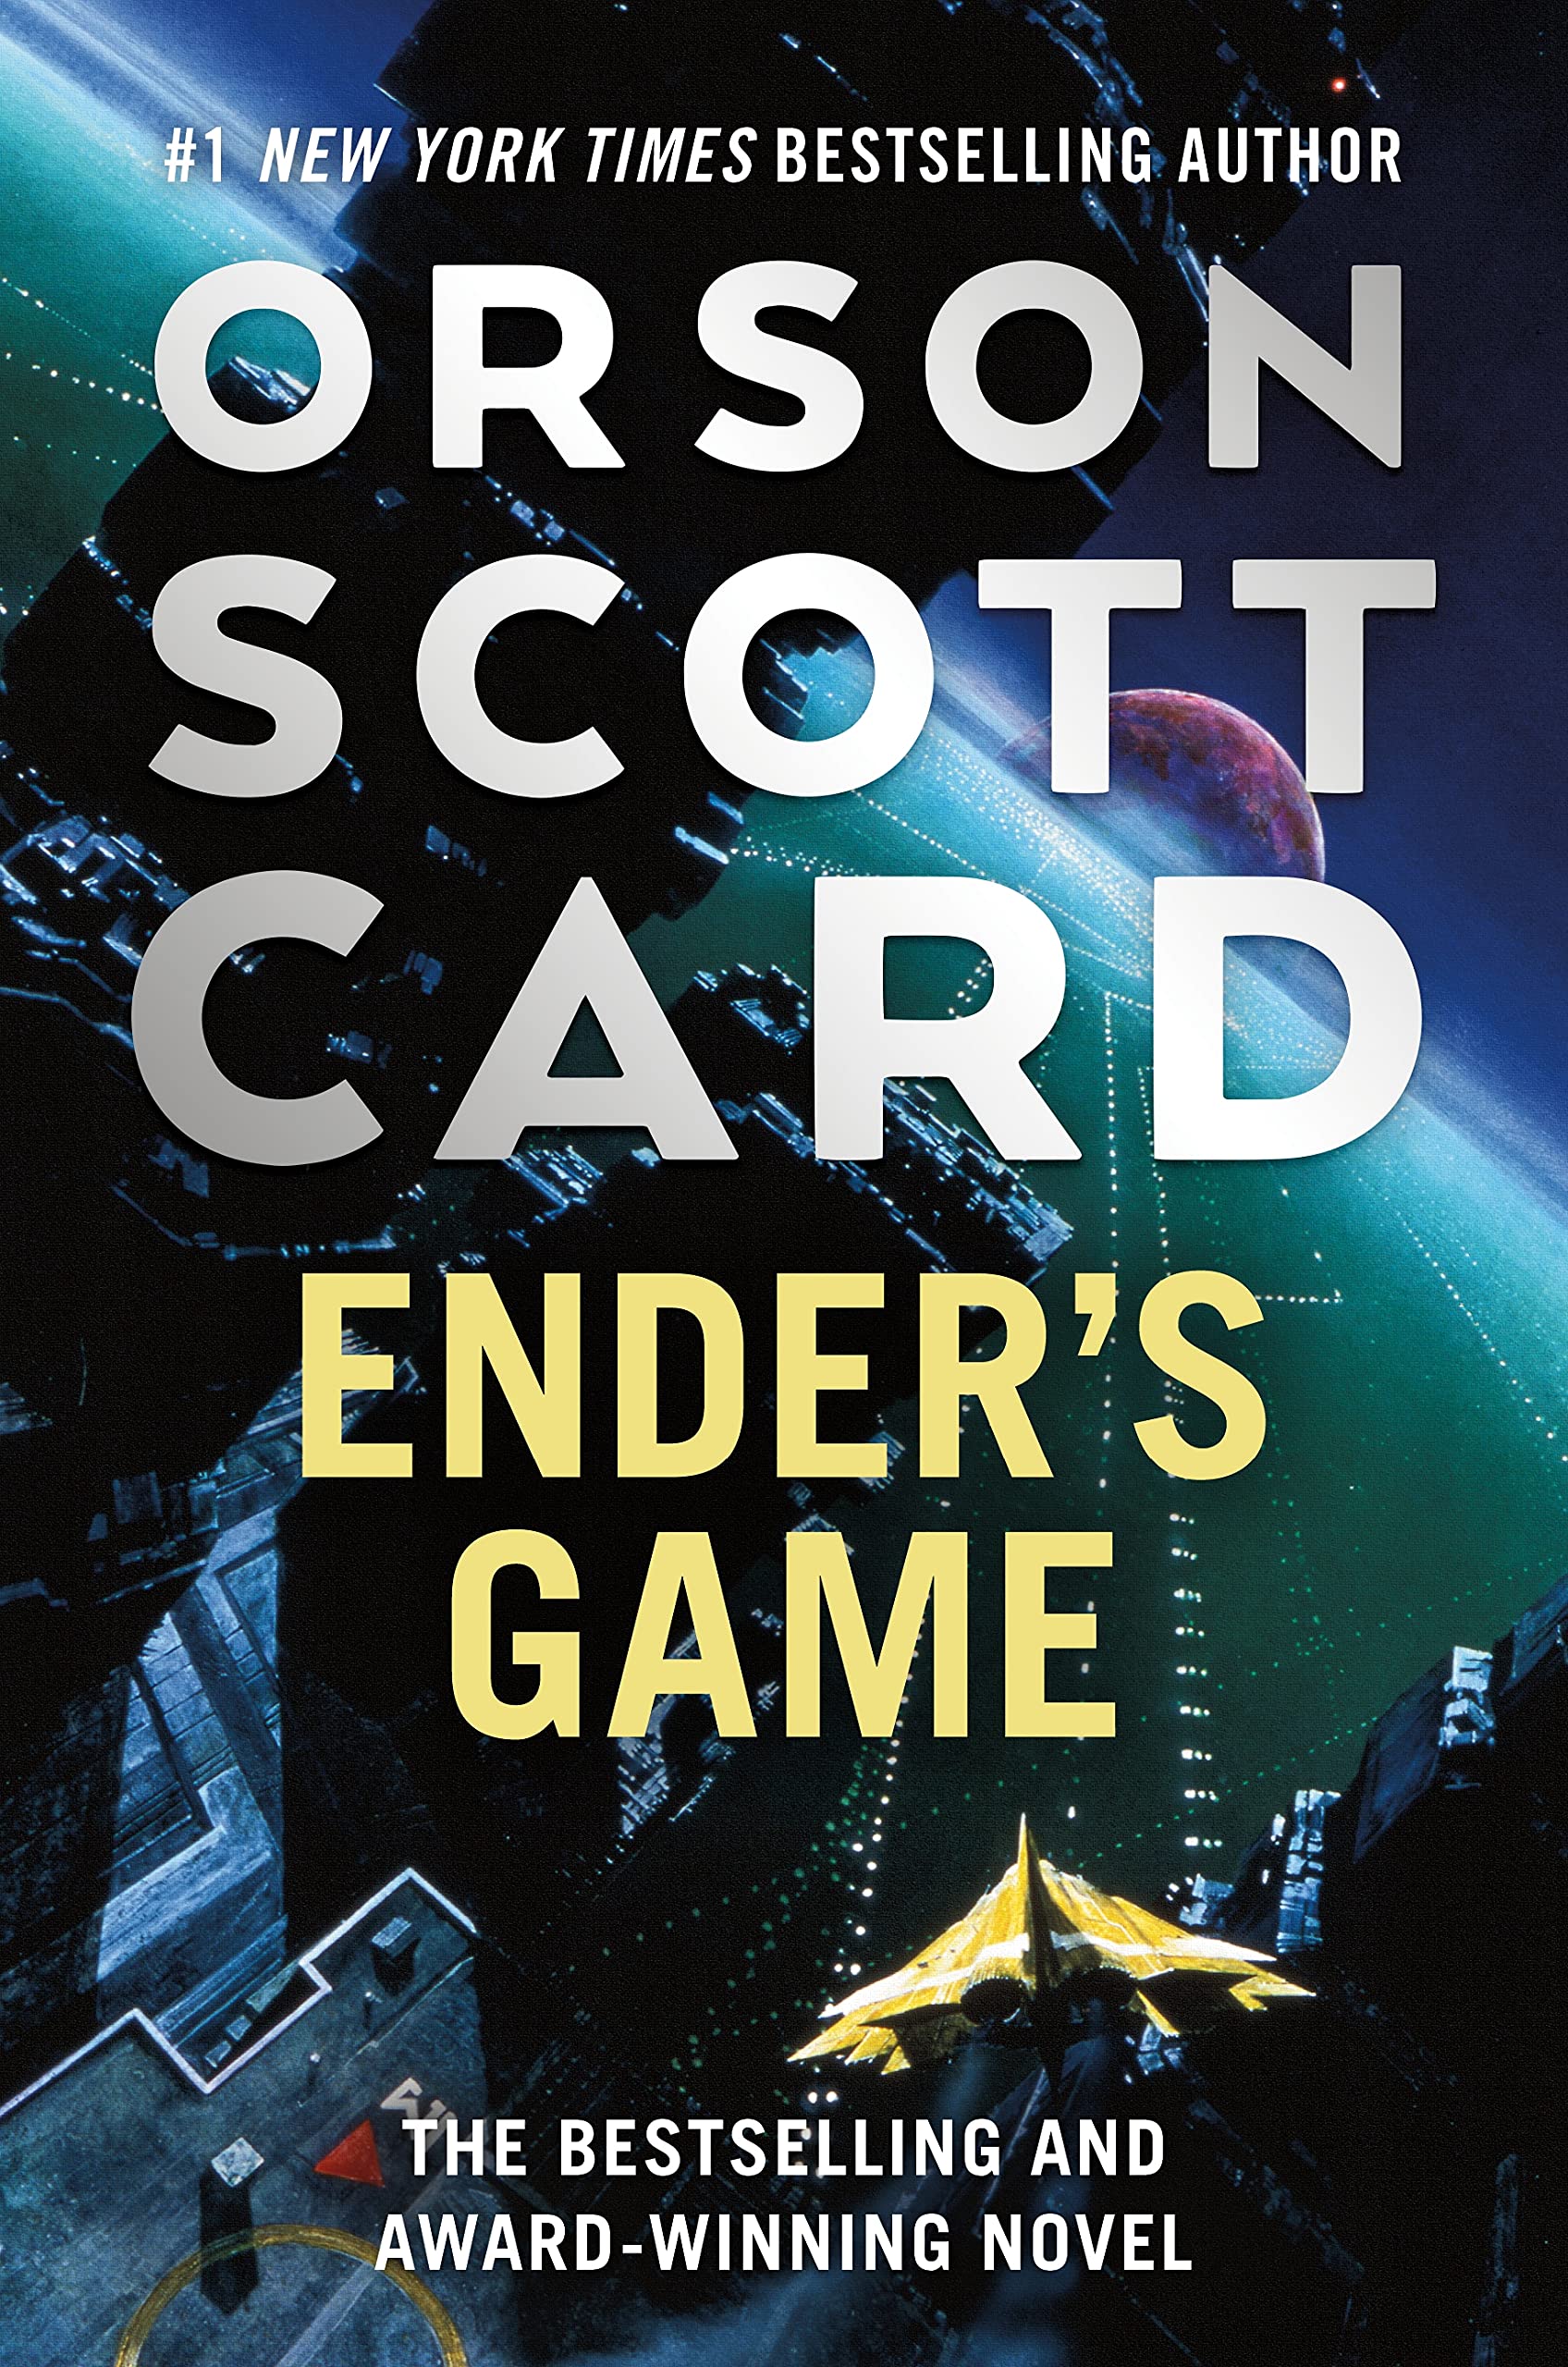 Ender's Game - Wikipedia